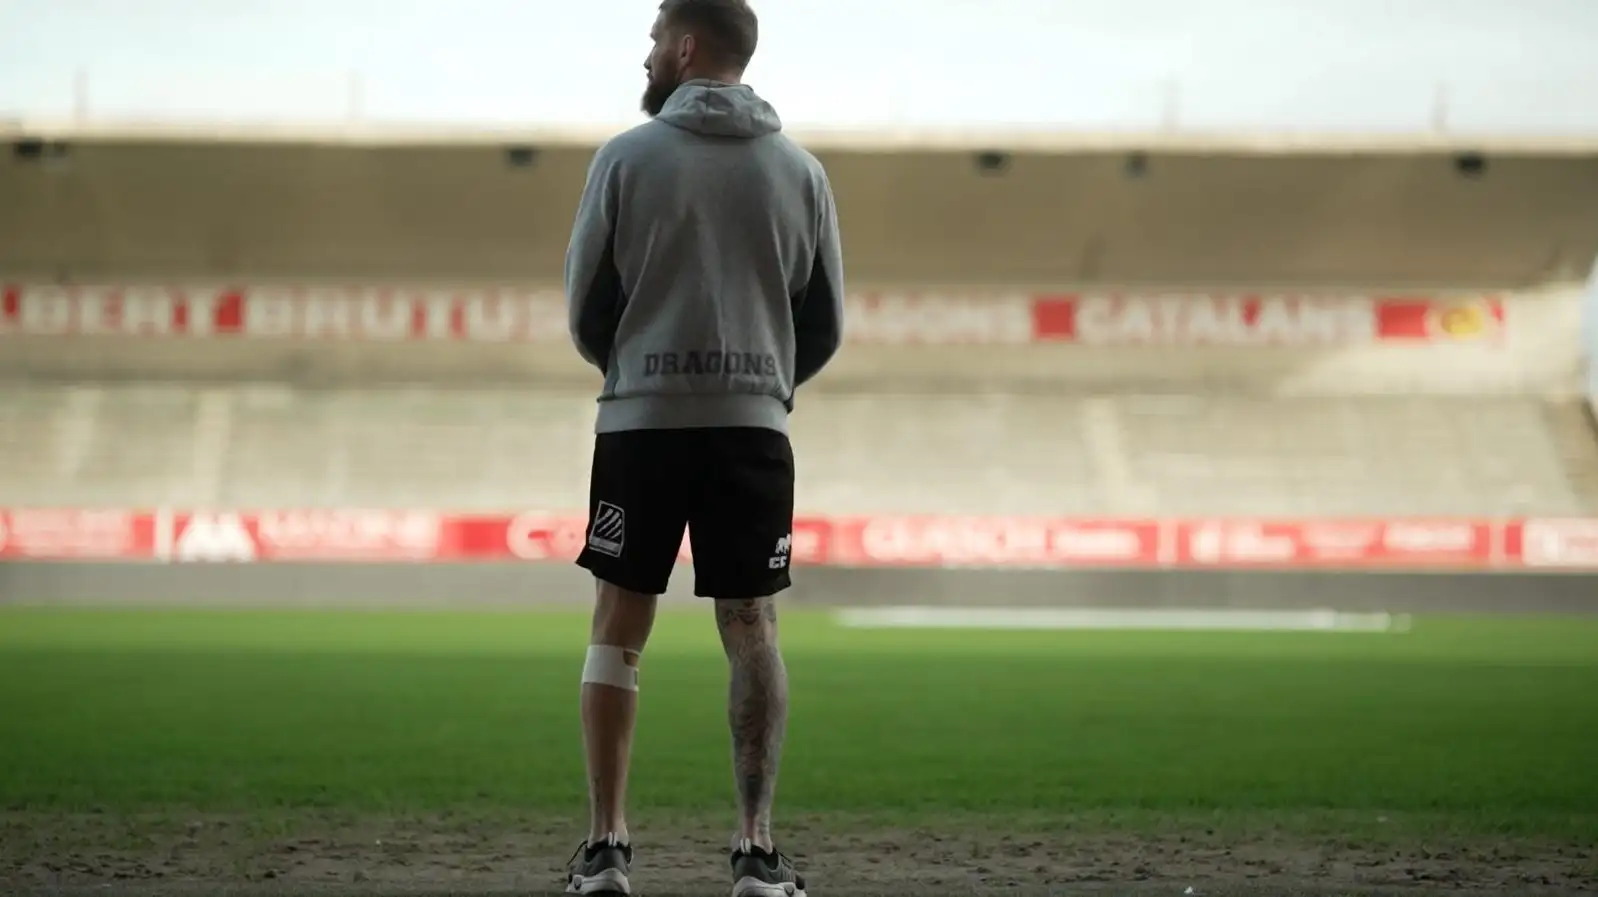 “Nothing is cut out”: Sam Tomkins discusses eye-opening documentary about Super League finale